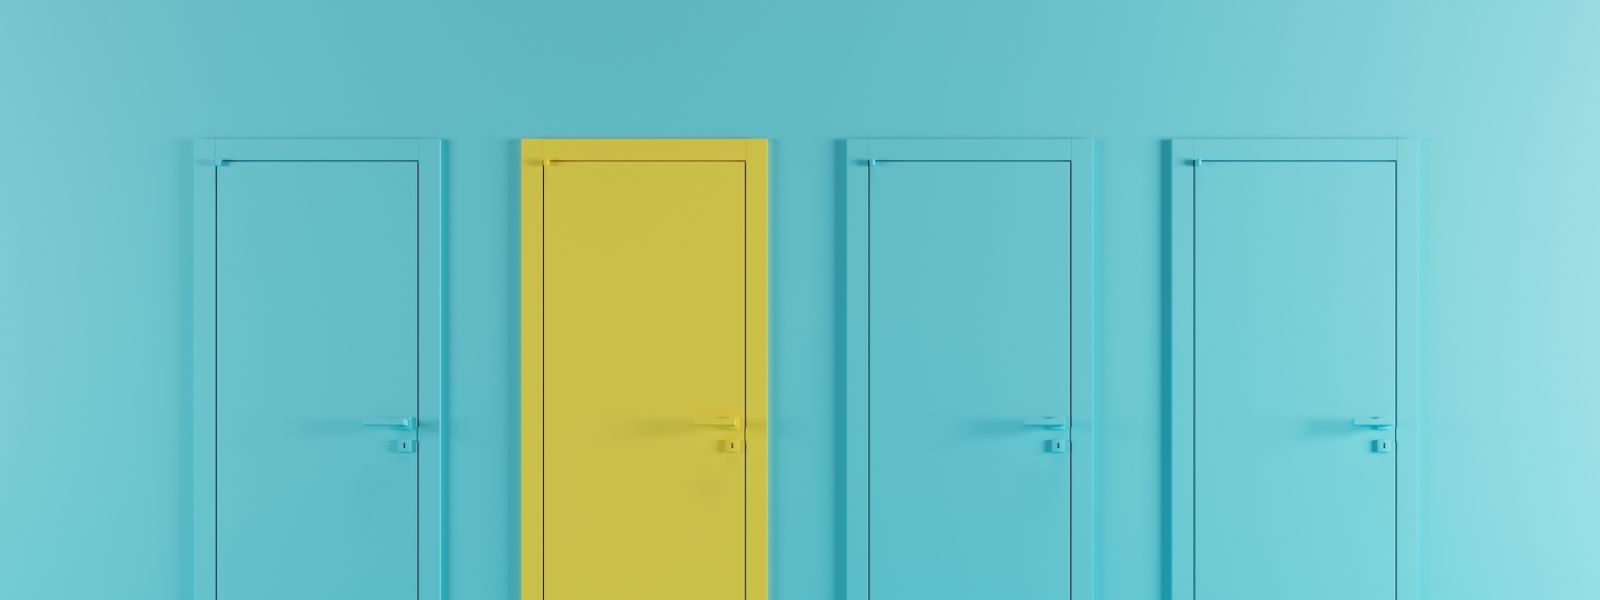 A light blue wall with four doors in a row, the first is the same colour blue, the second is bright yellow, and the third and fourth are blue again.